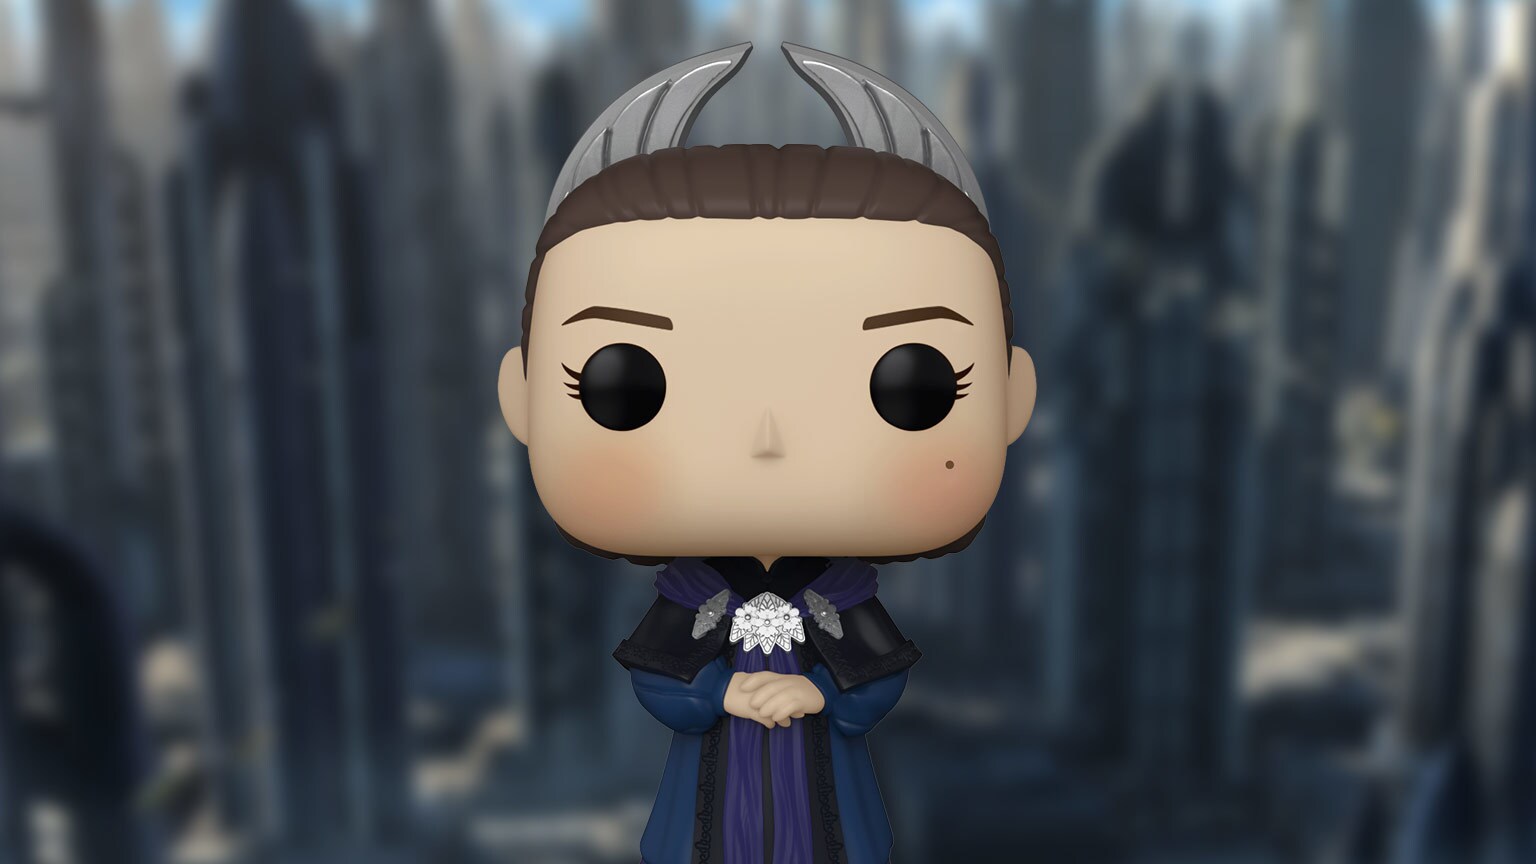 Funko Celebrates Padmé and the “Power of the Galaxy” - Exclusive